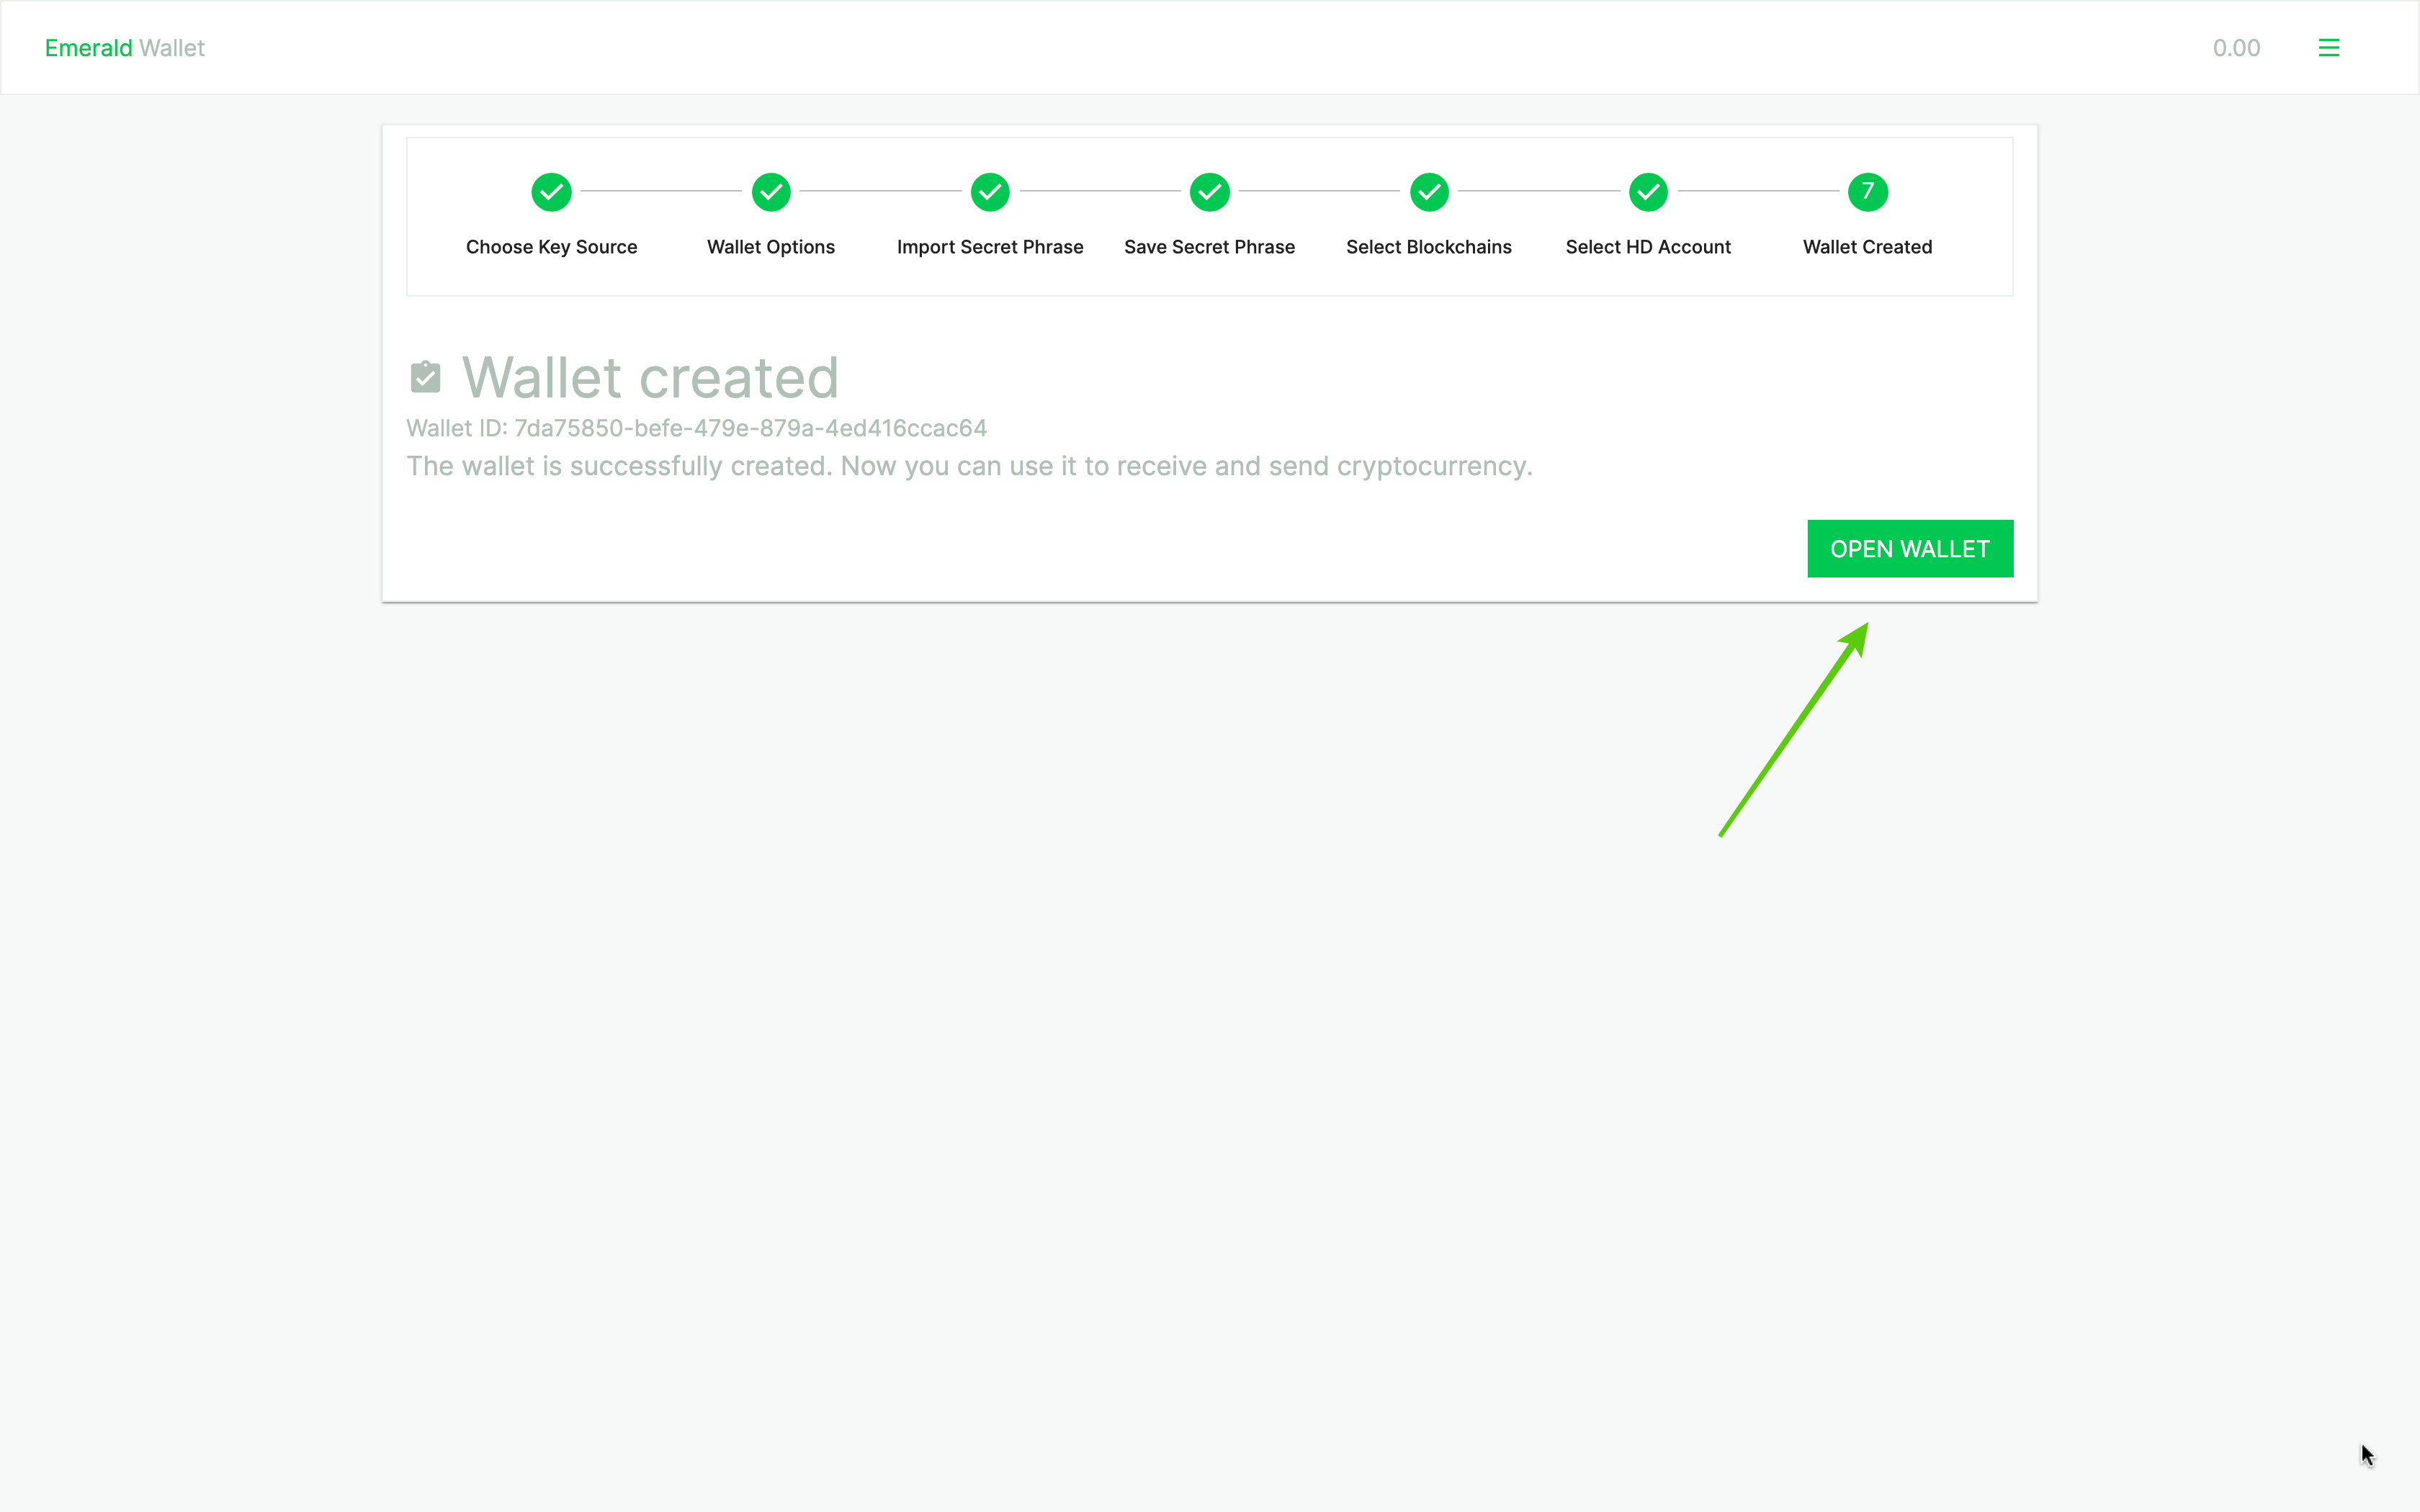 Wallet created.